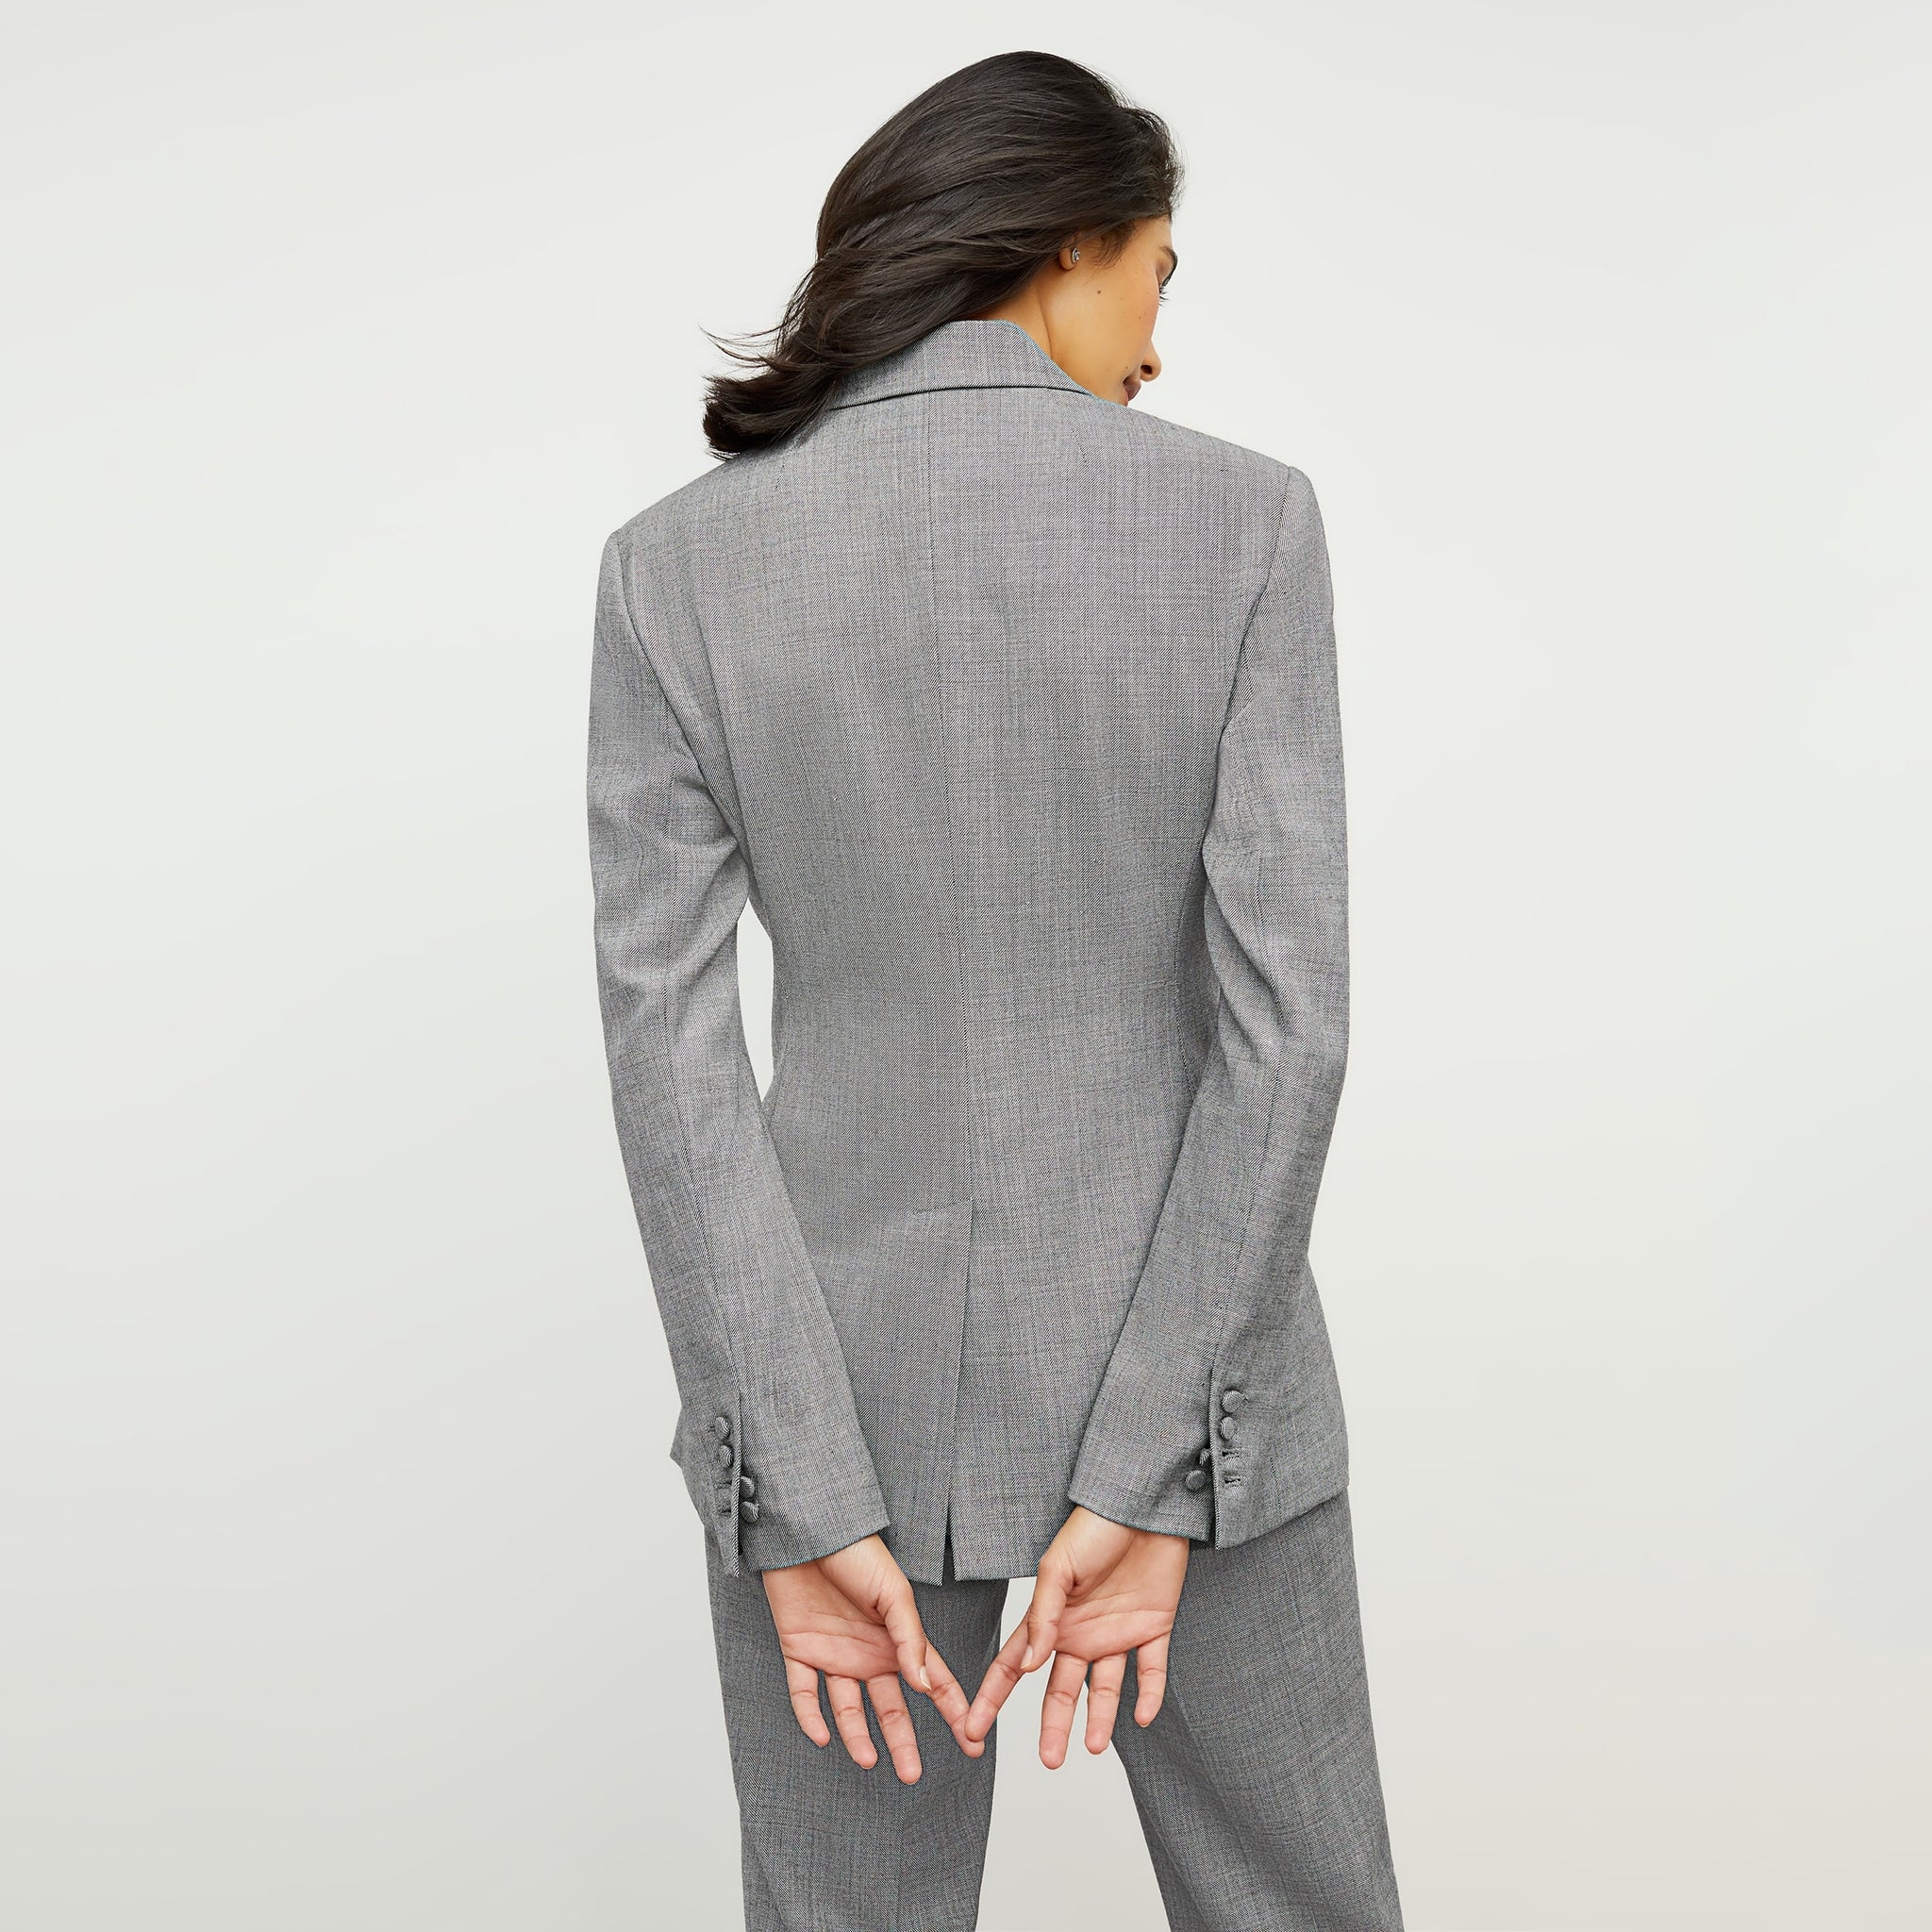 Back image of a woman standing wearing the gaia jacket in sharkskin in black and white